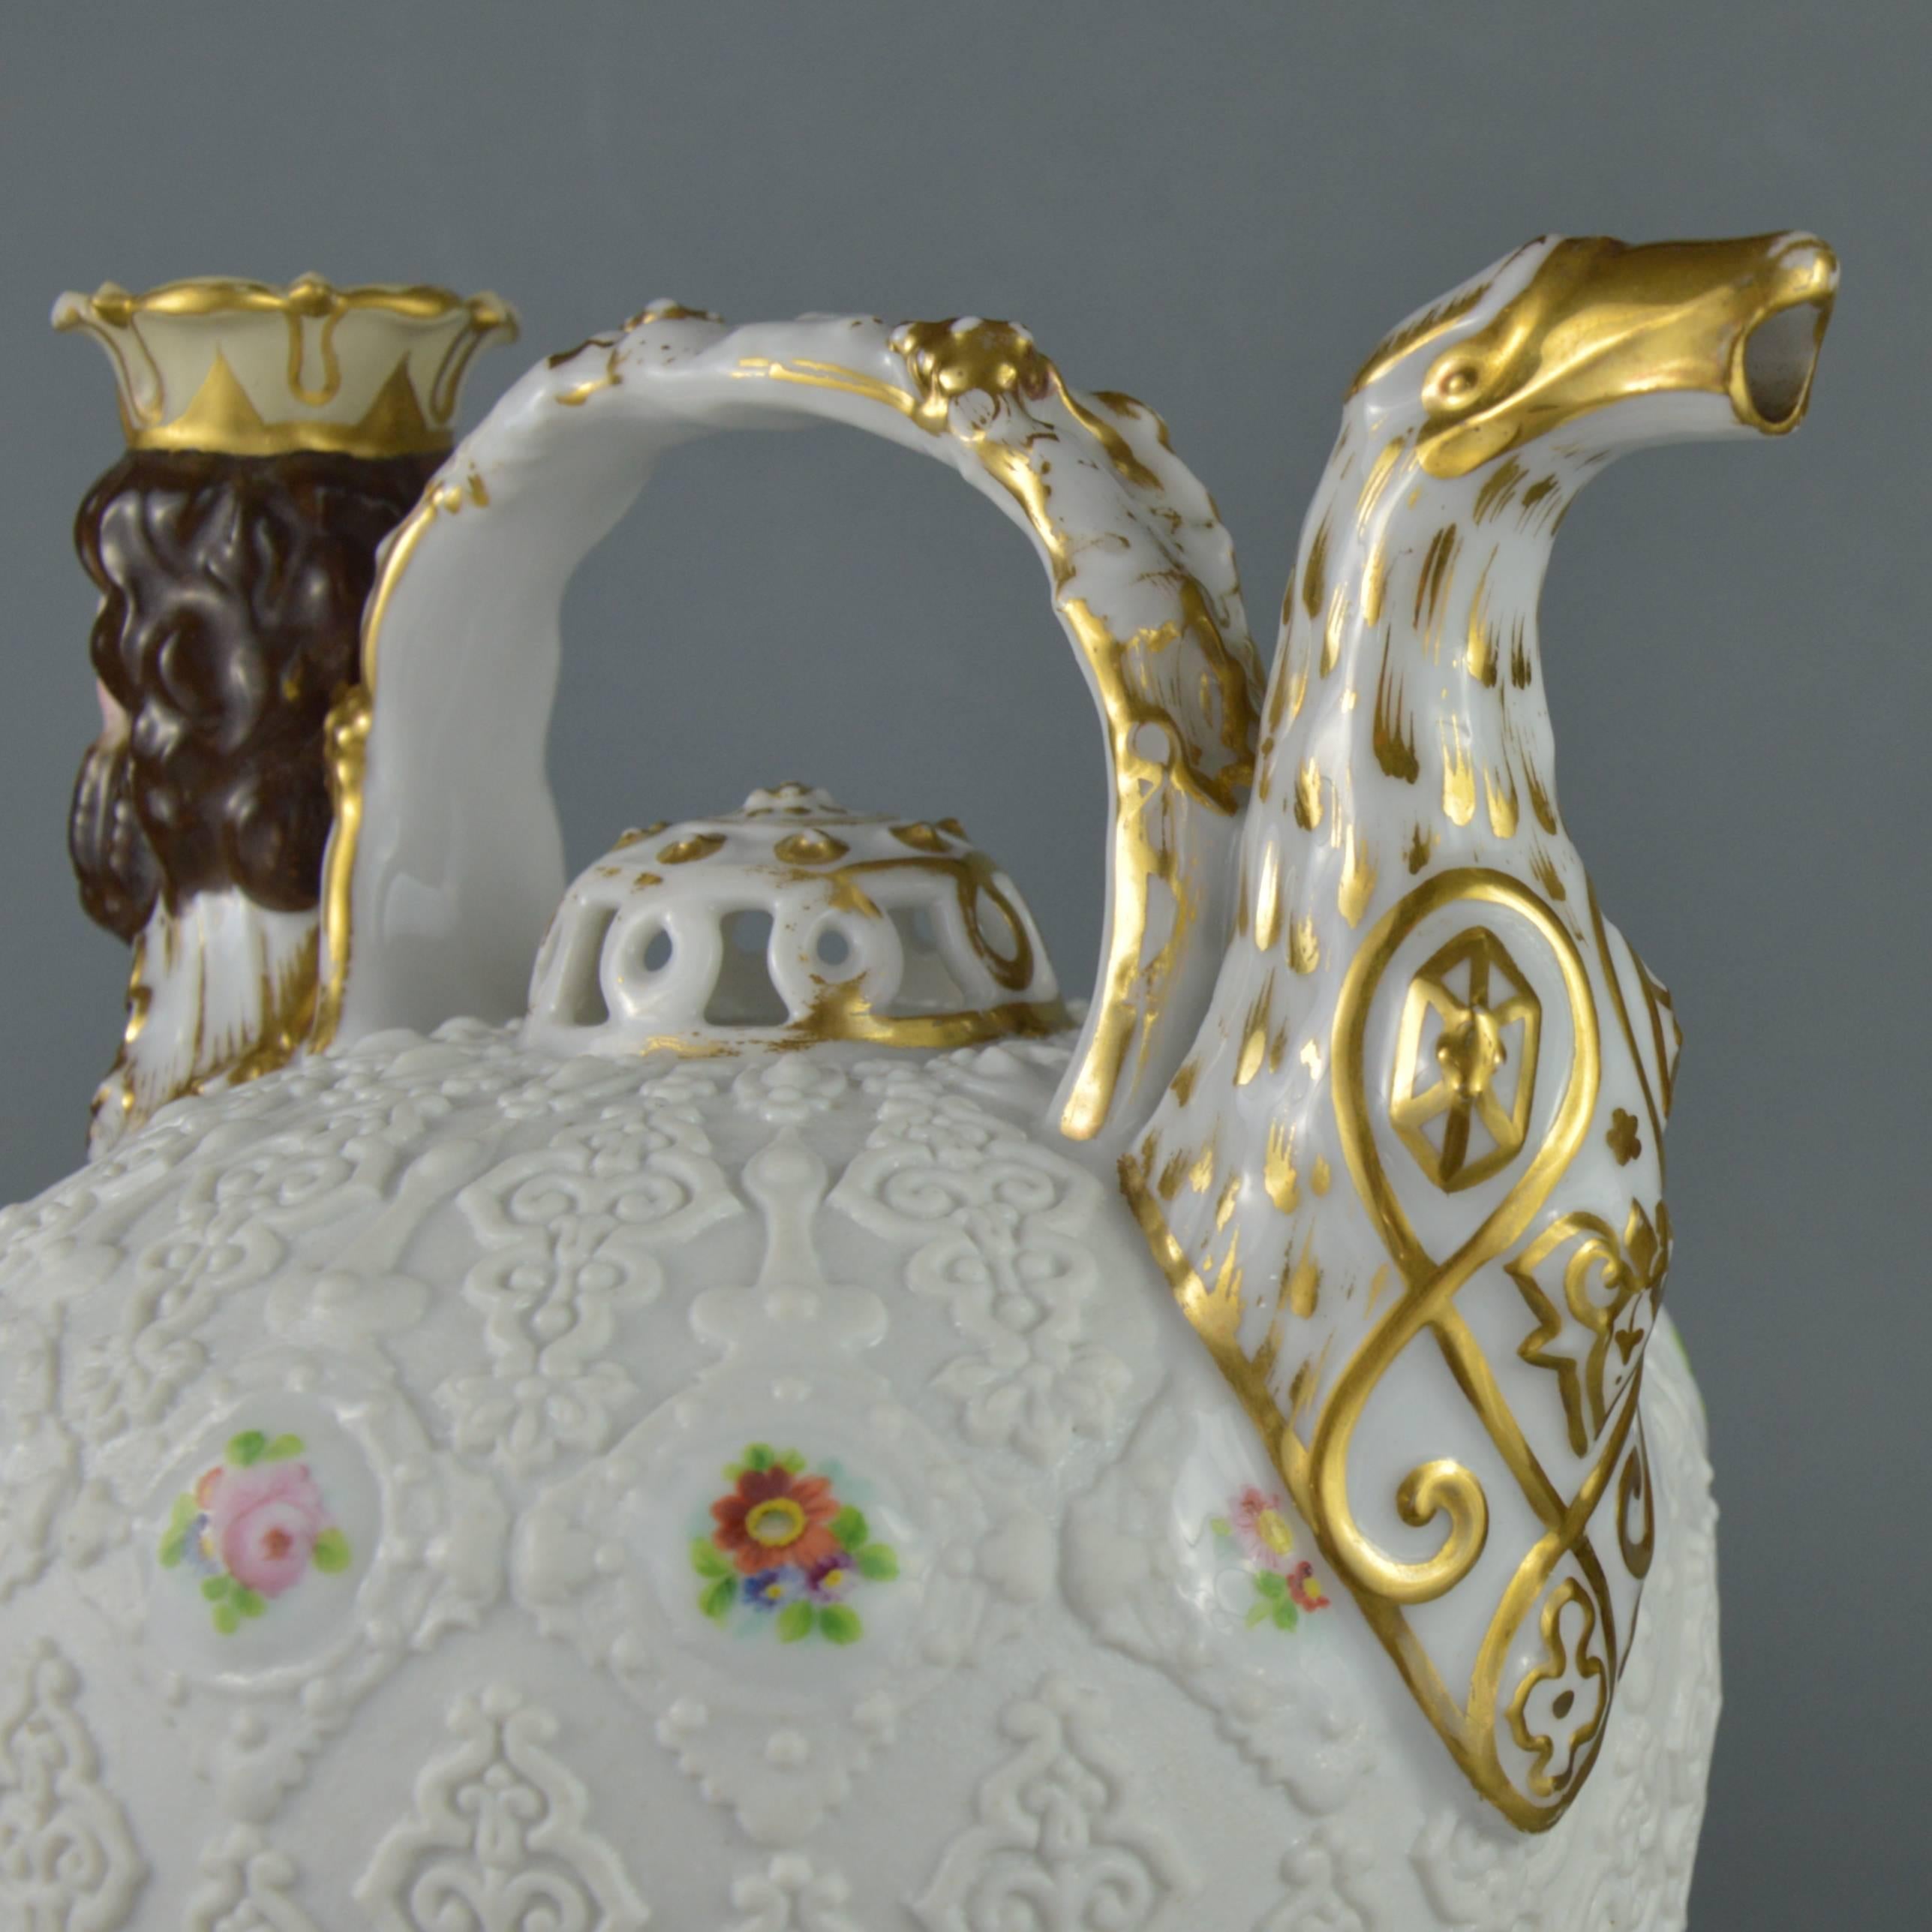 Rare Collectible Porcelain Pitcher, Paris Manufacturer Jacob Petit, 19th Century In Good Condition For Sale In Brussels, BE